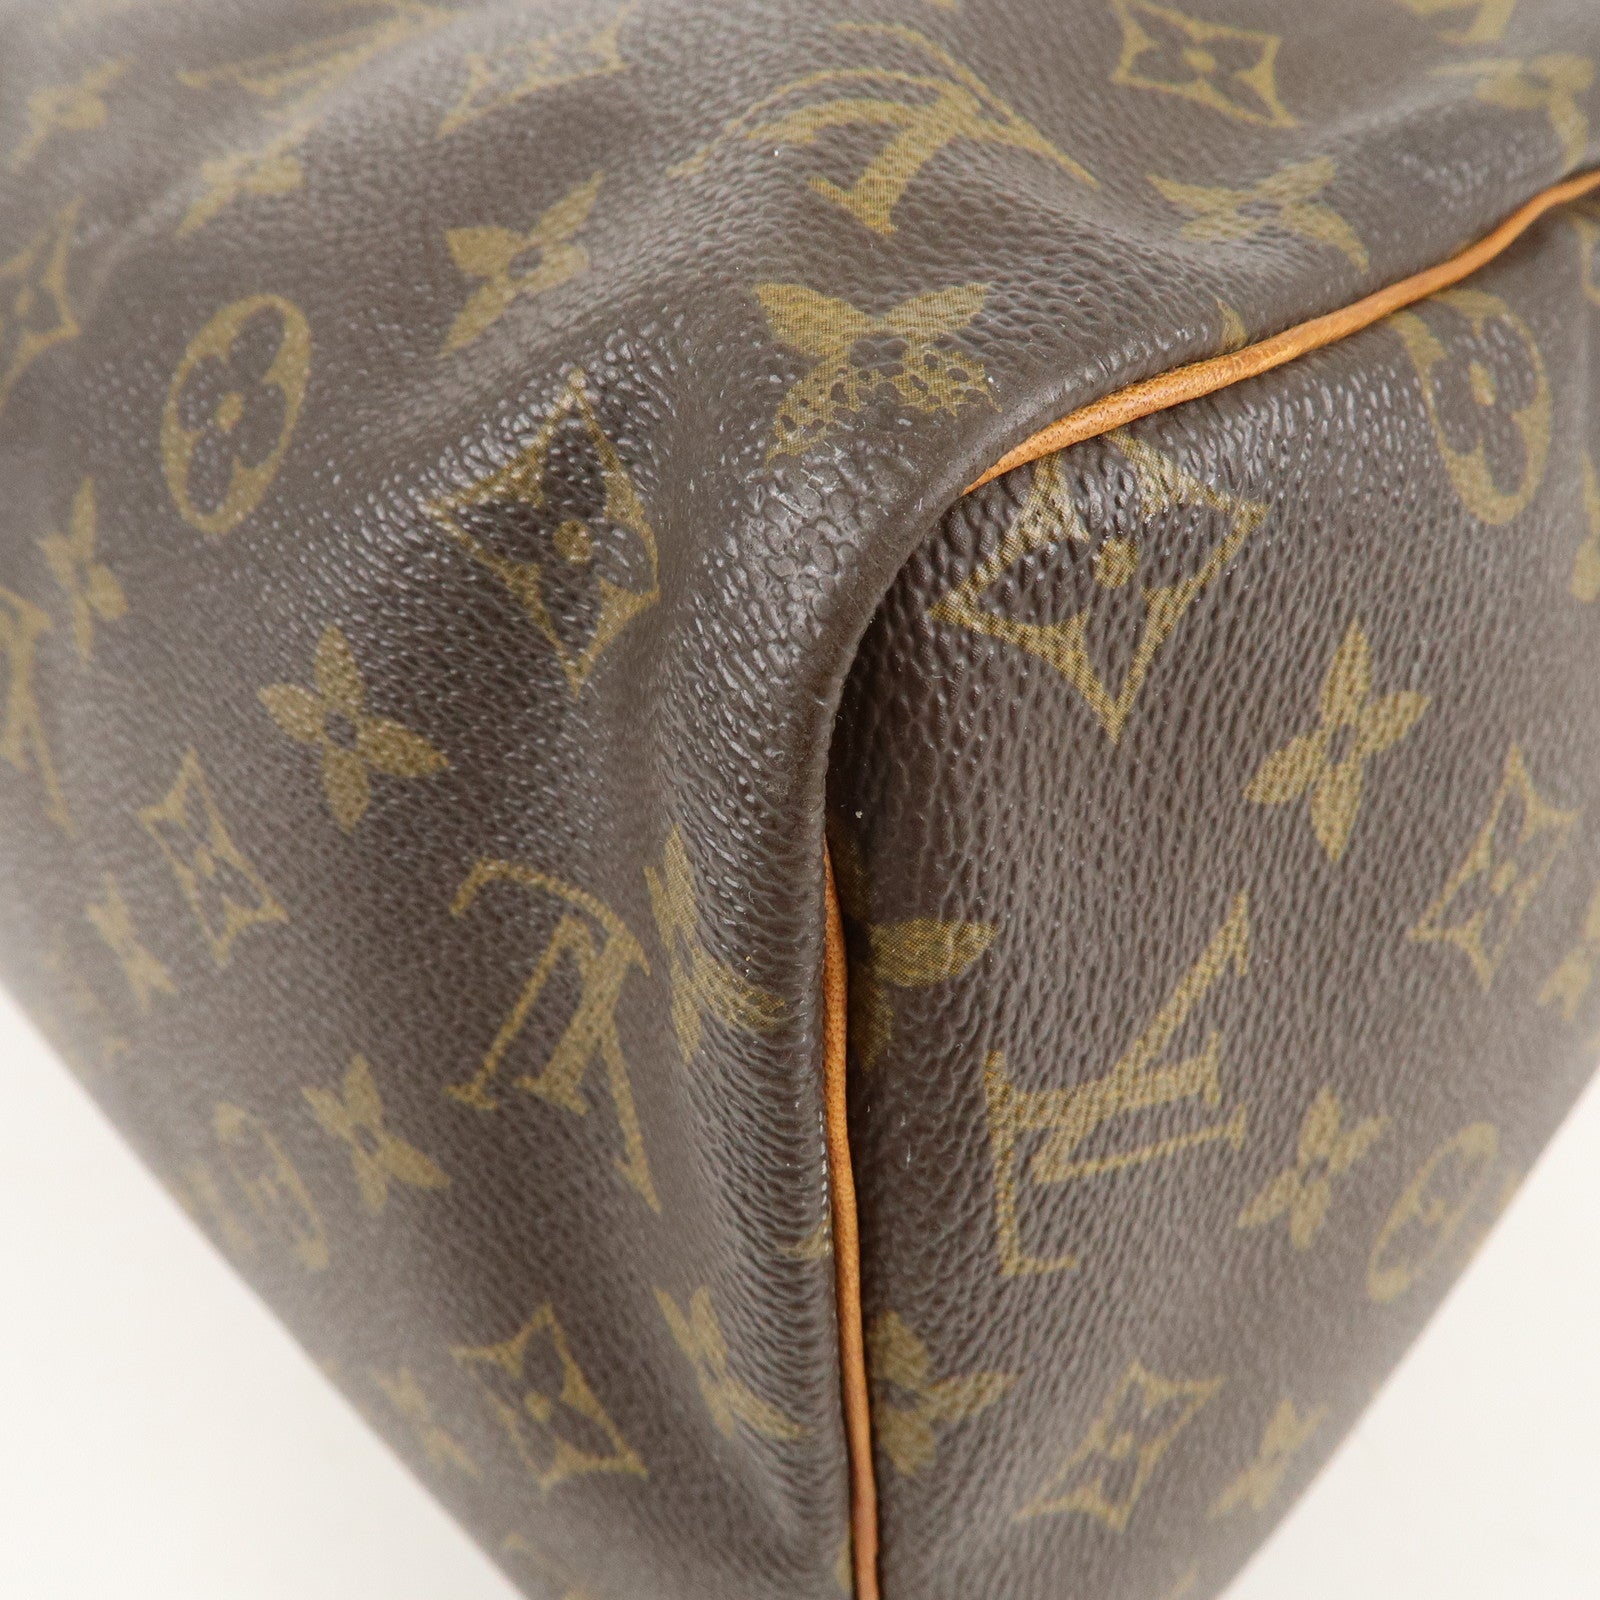 Buy Free Shipping [Used] LOUIS VUITTON Speedy 30 Handbag Monogram M41526  from Japan - Buy authentic Plus exclusive items from Japan